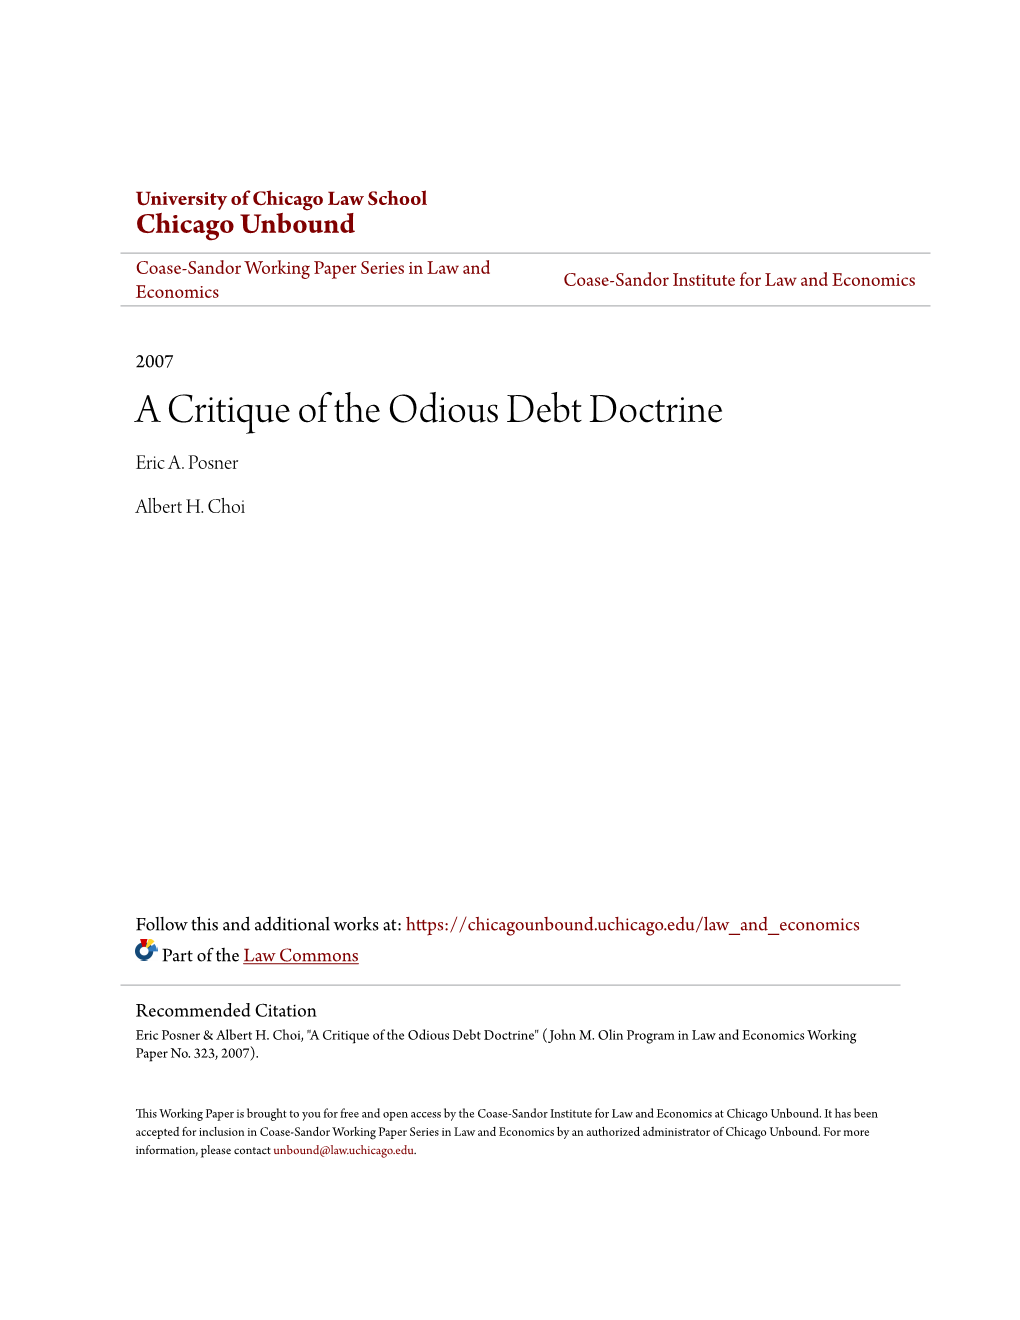 A Critique of the Odious Debt Doctrine Eric A